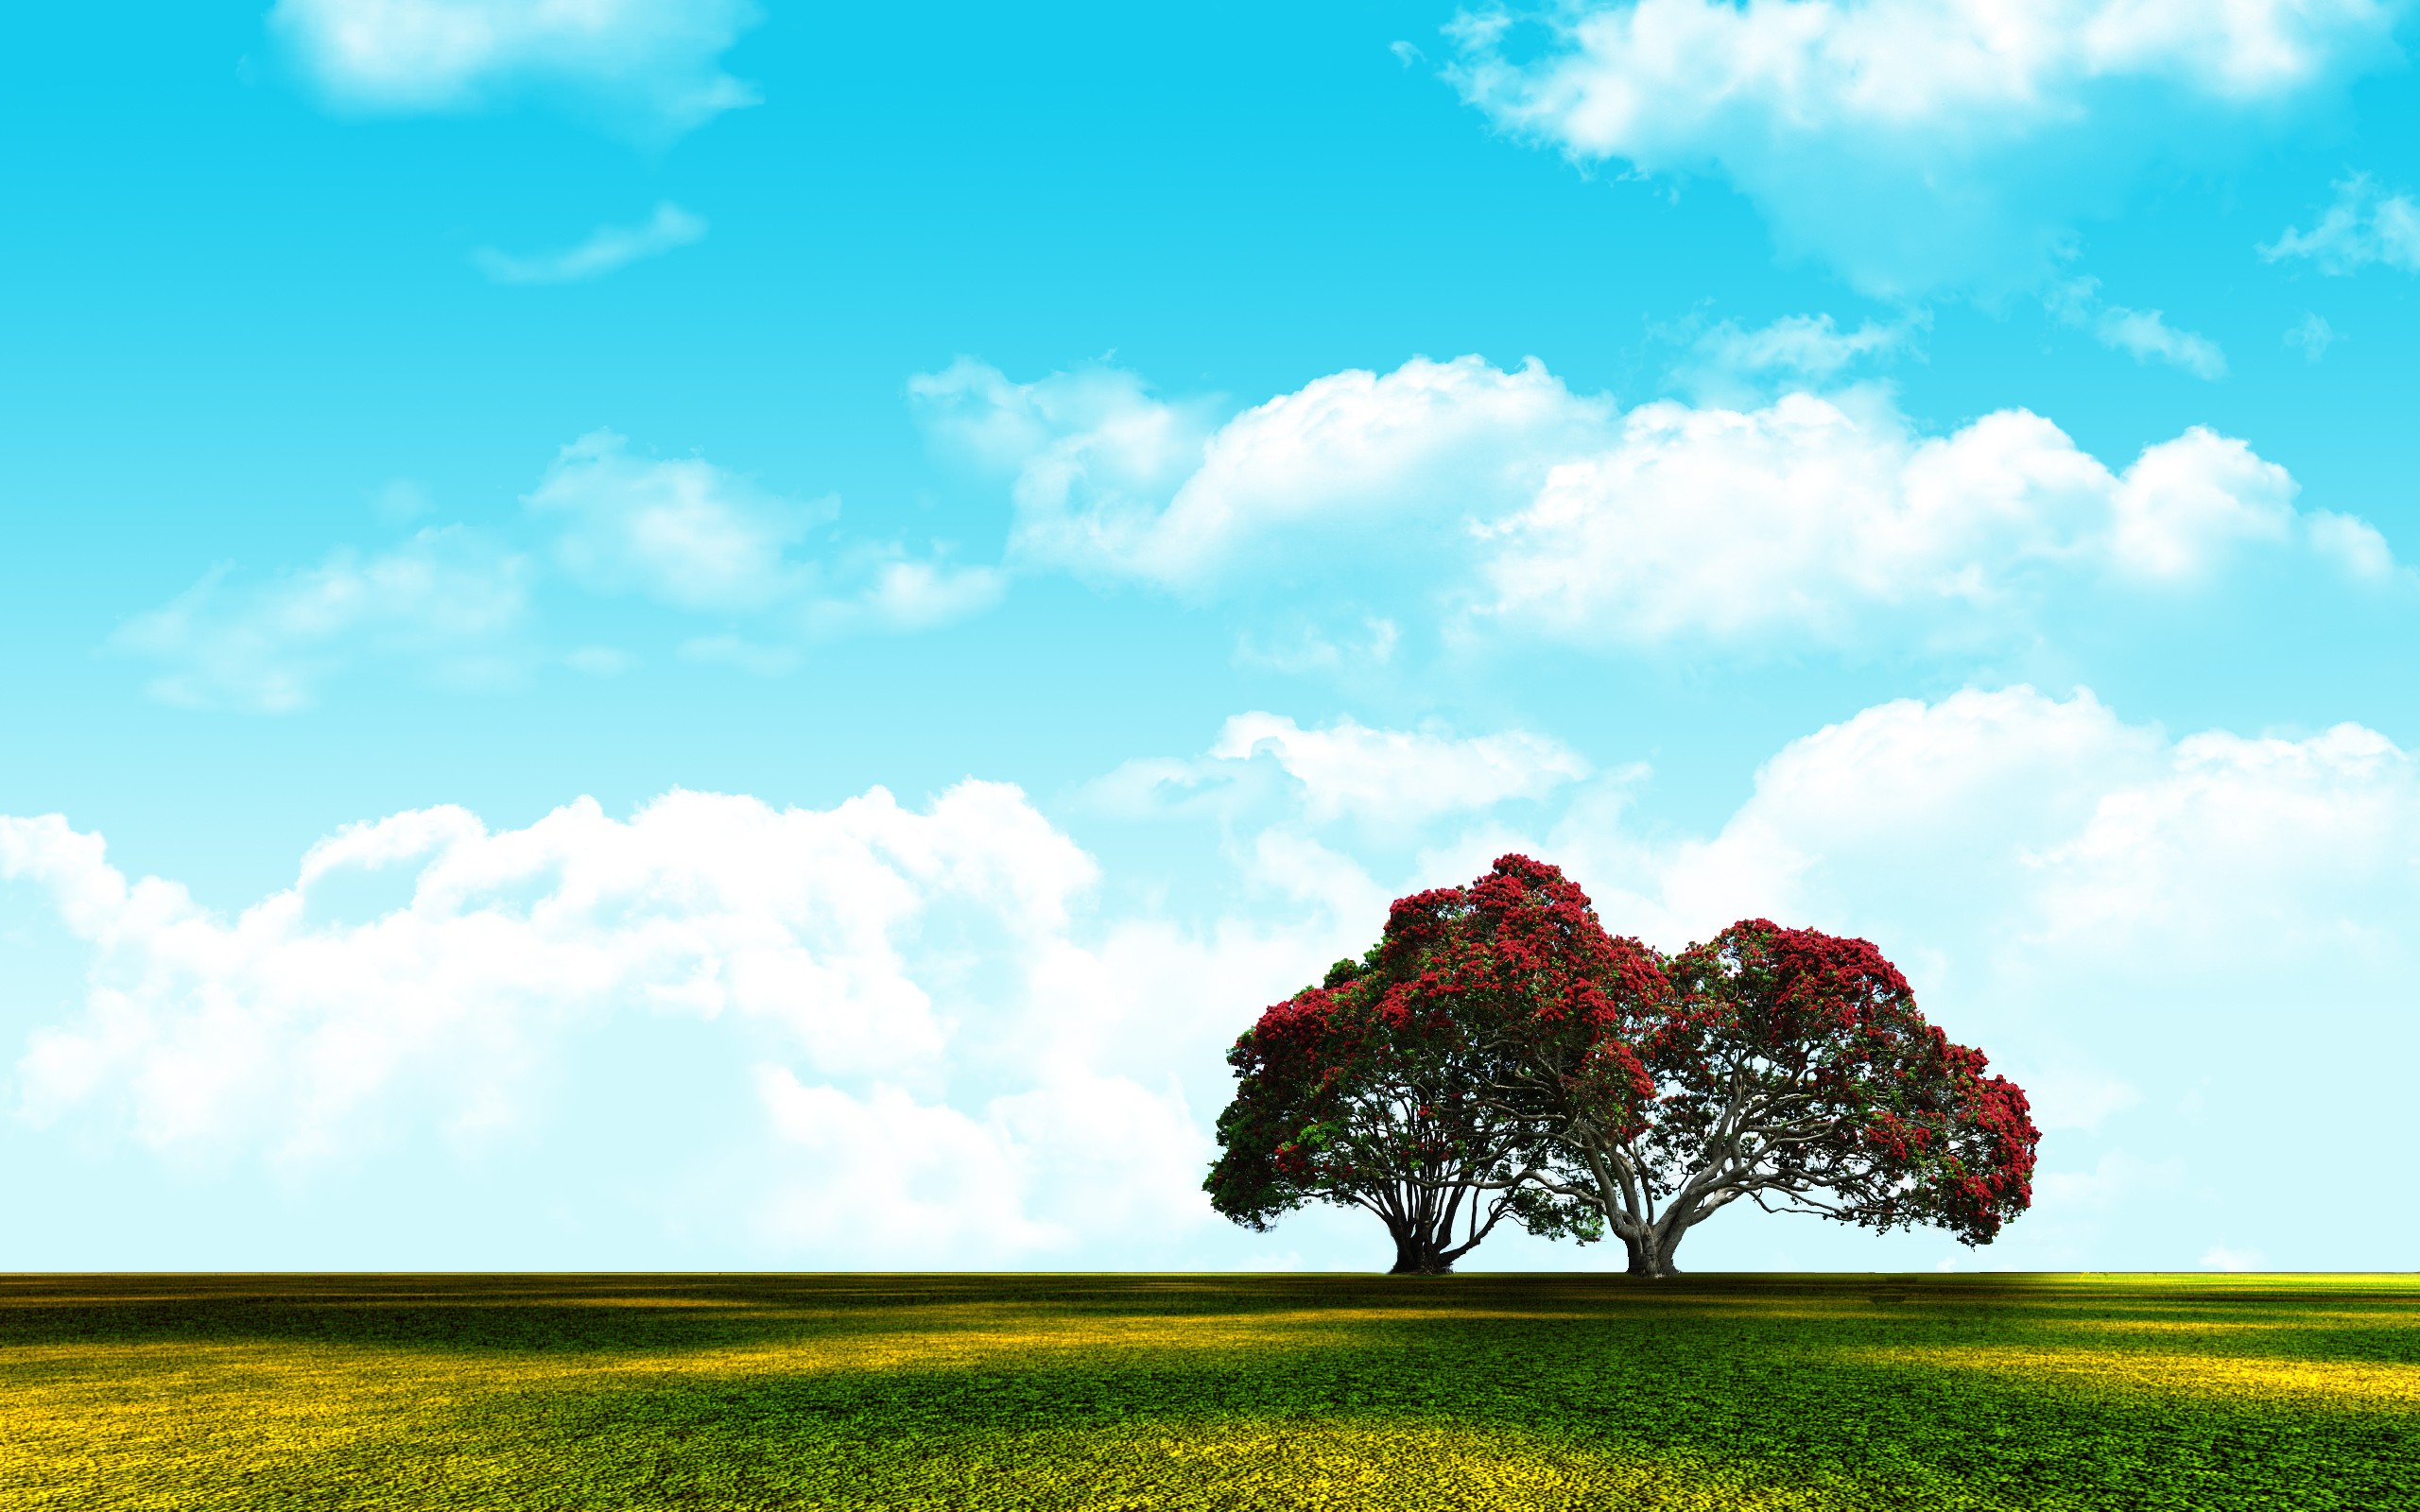 background images for adobe photoshop free download